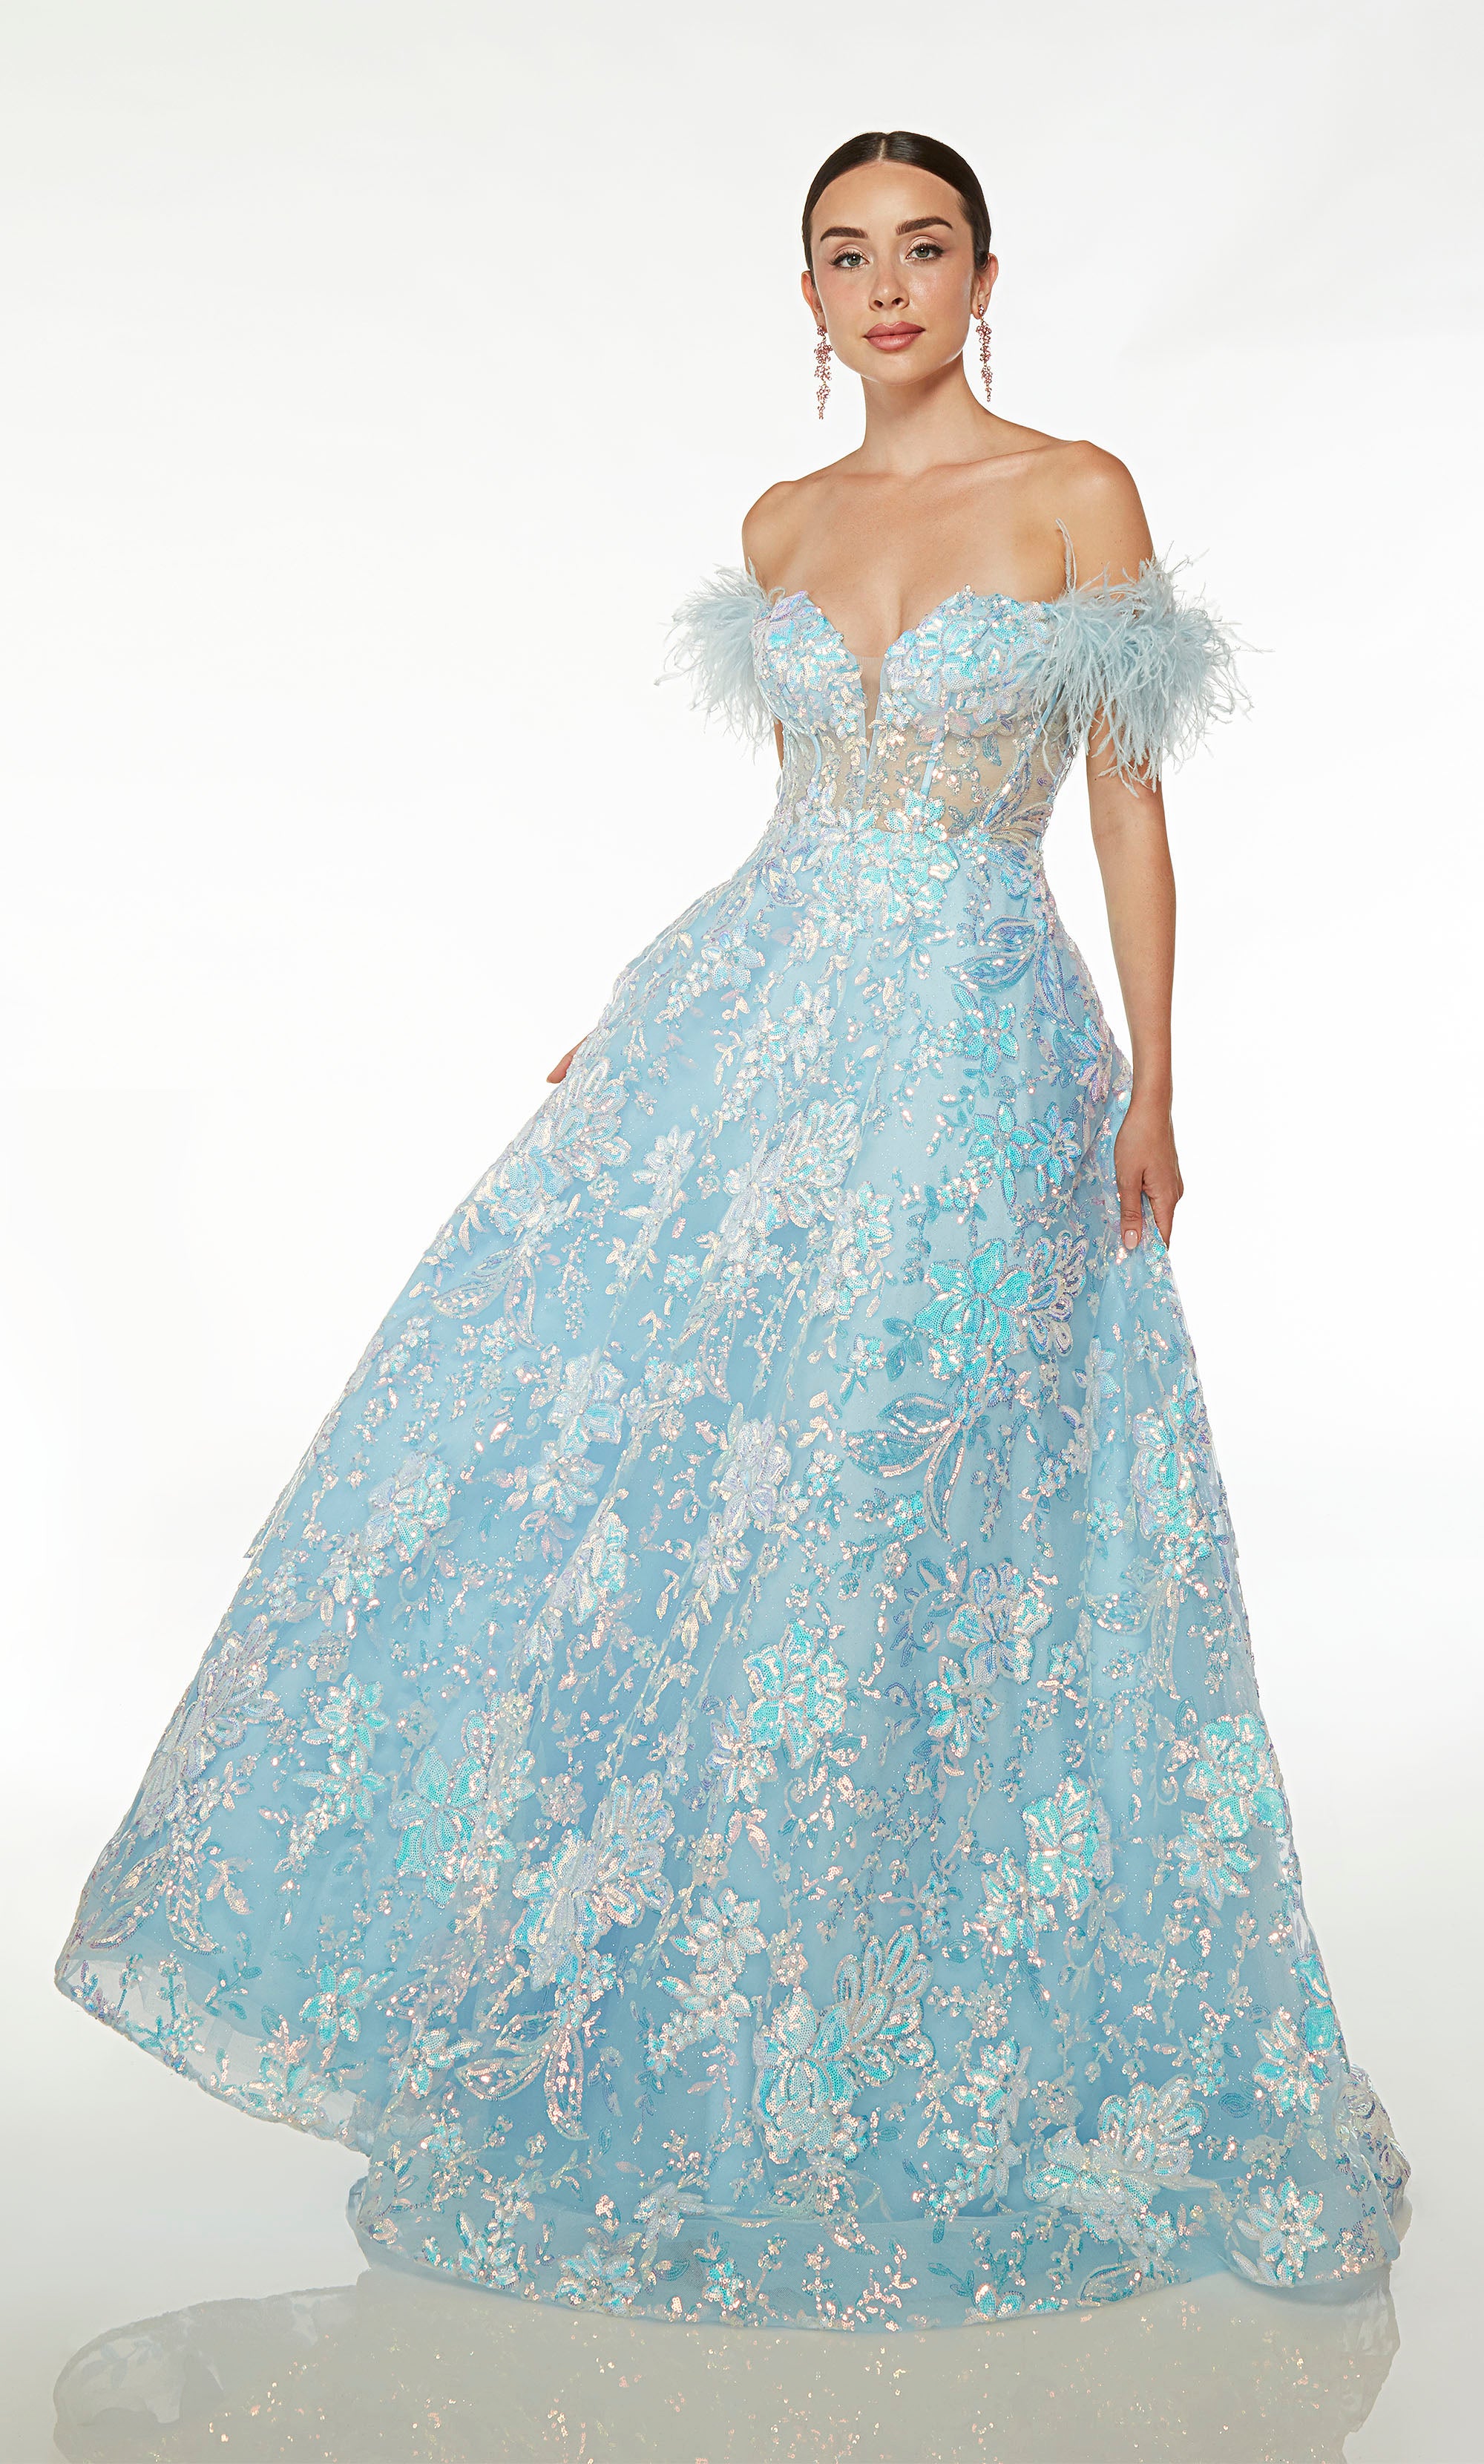 Light blue iridescent sequin floral ball gown: sheer off-the-shoulder corset bodice, detachable feather straps, lace-up back, and train for an stunning look.